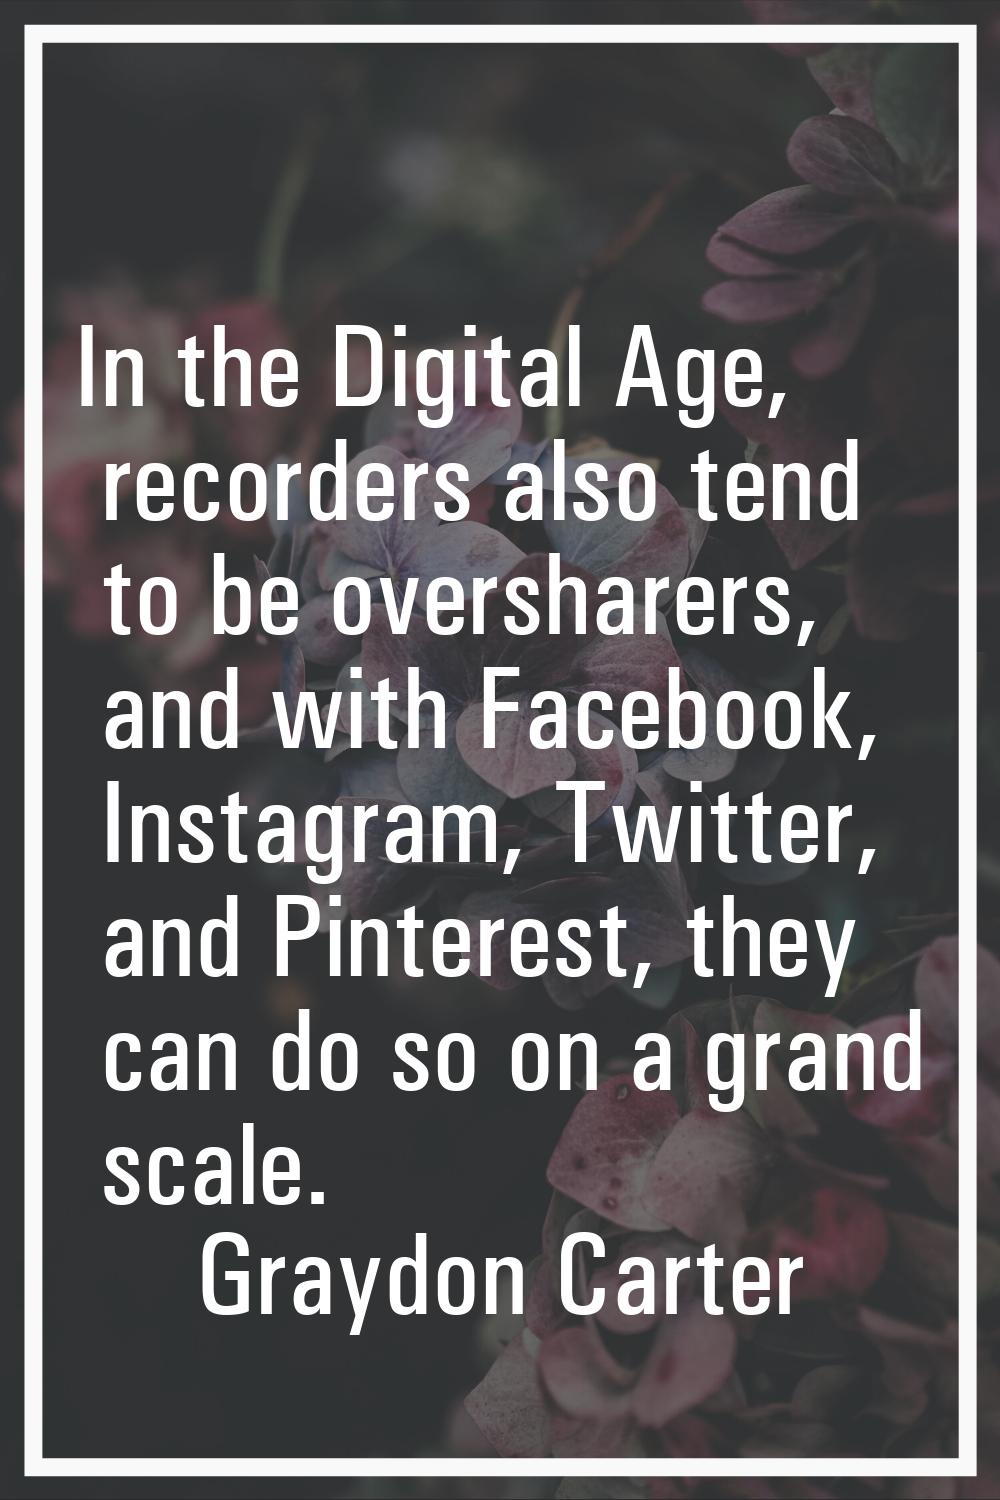 In the Digital Age, recorders also tend to be oversharers, and with Facebook, Instagram, Twitter, a